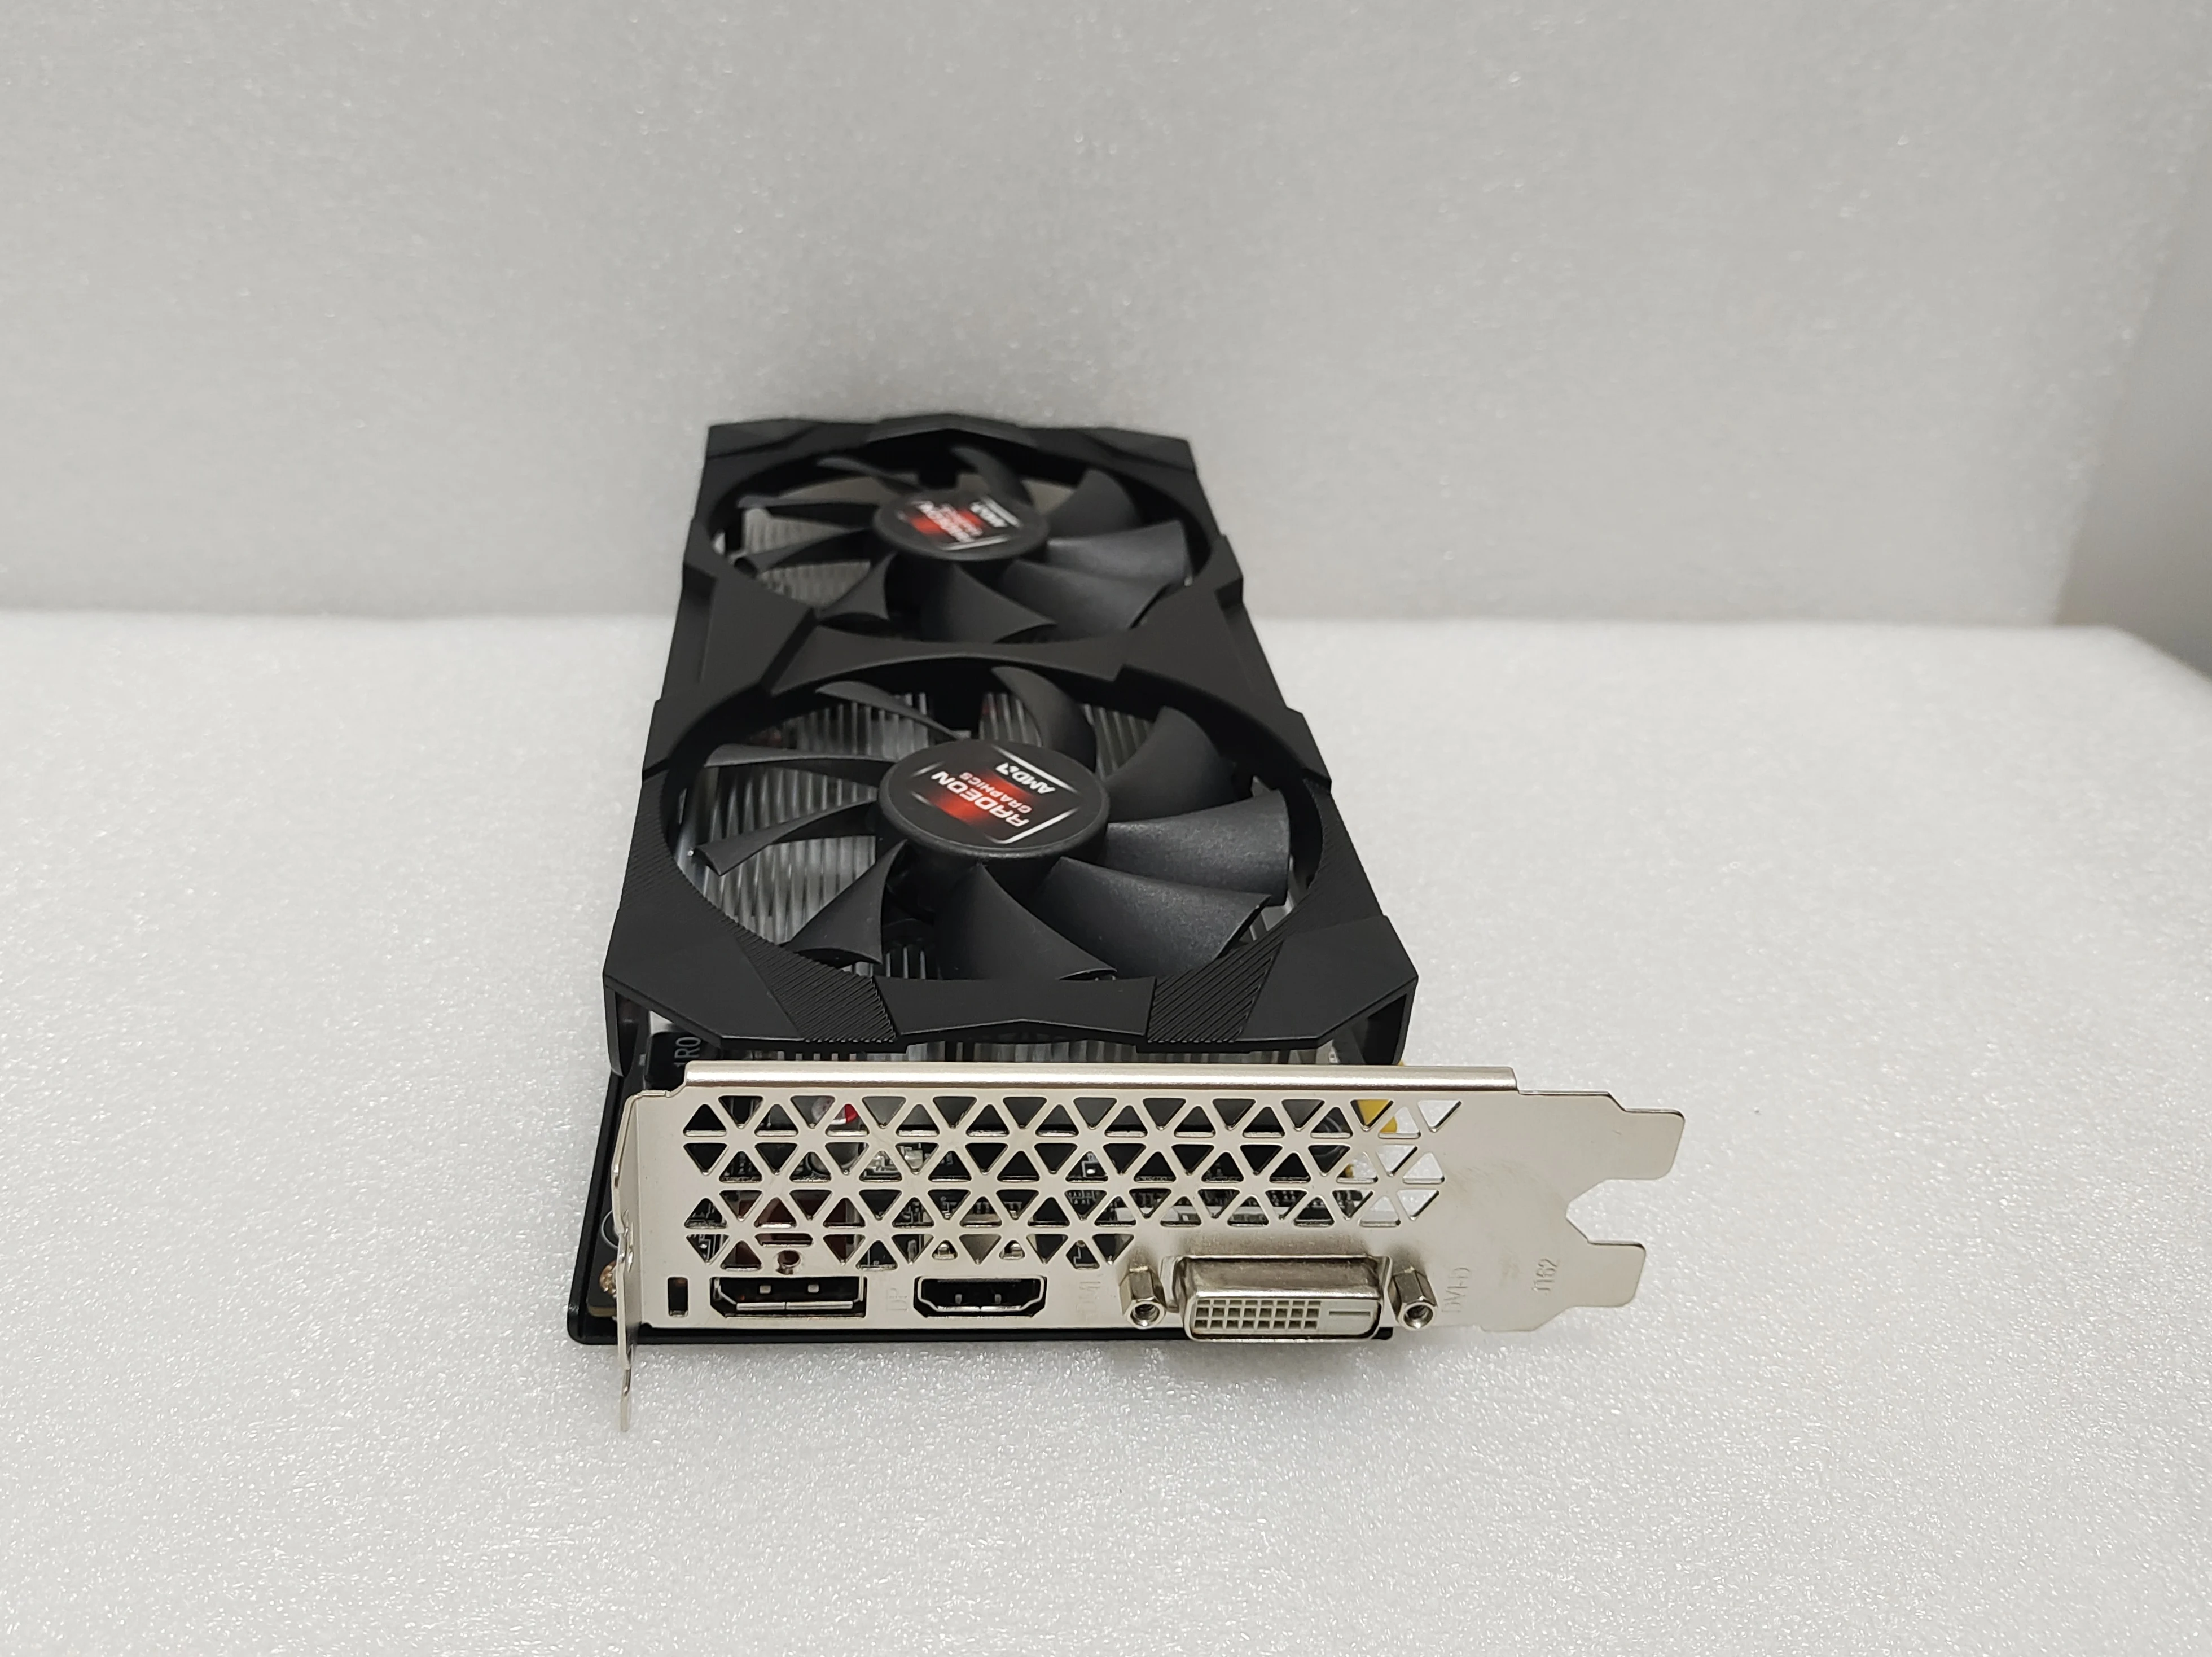 Sapphire RX 590 8g 256bit GDDR5 Graphic Cards For Computer gaming  AMD rx590 8g VIDEO CARD 590 rx 8g original bios